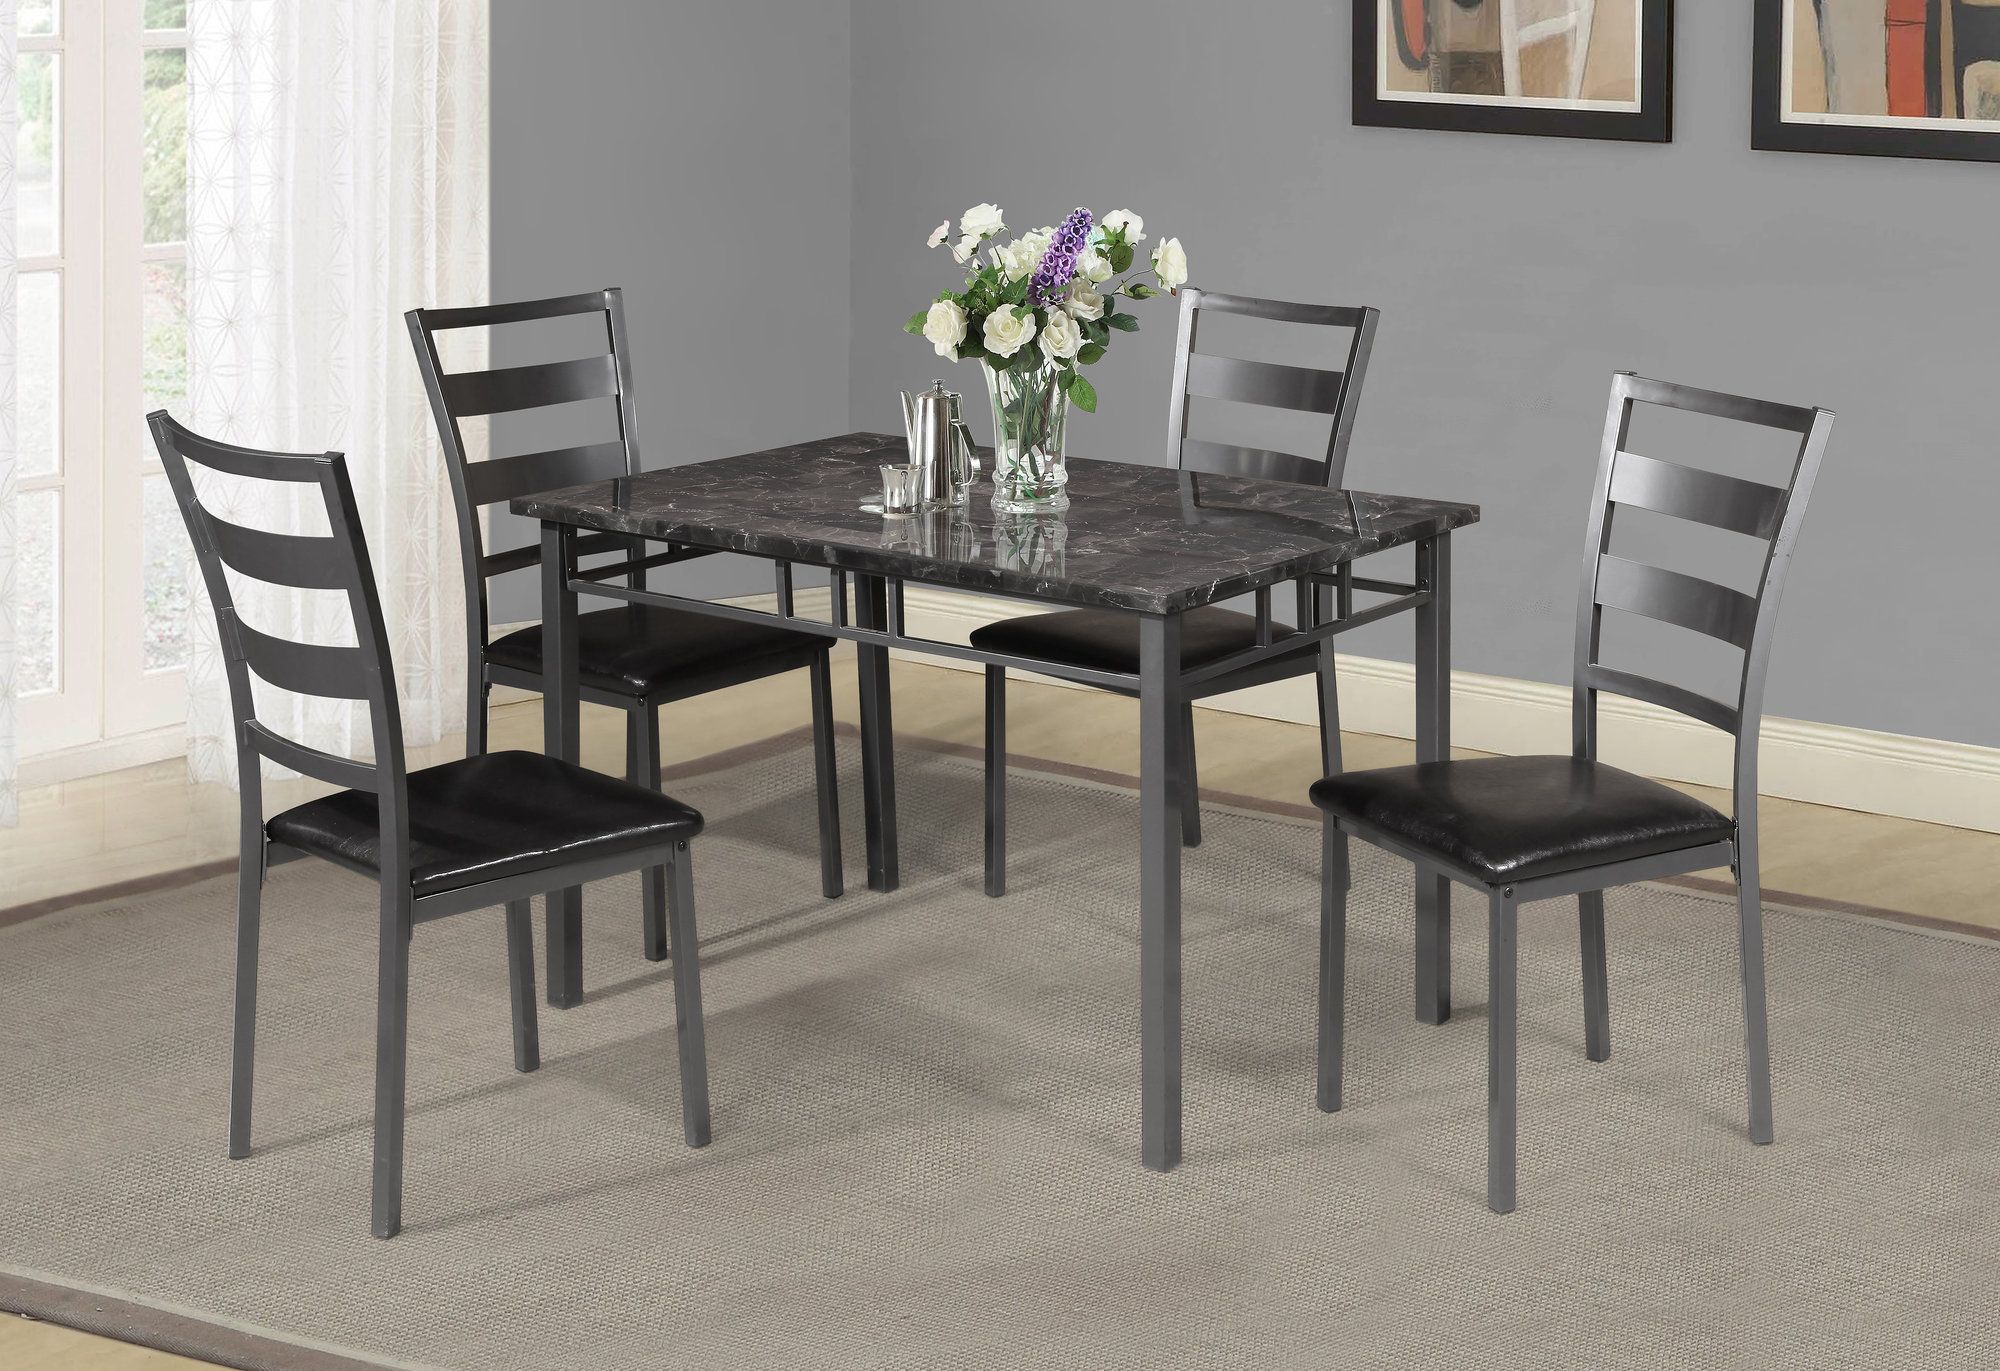 Details About Winston Porter Berke 5 Piece Dining Set Intended For Most Recent Miskell 3 Piece Dining Sets (View 15 of 20)